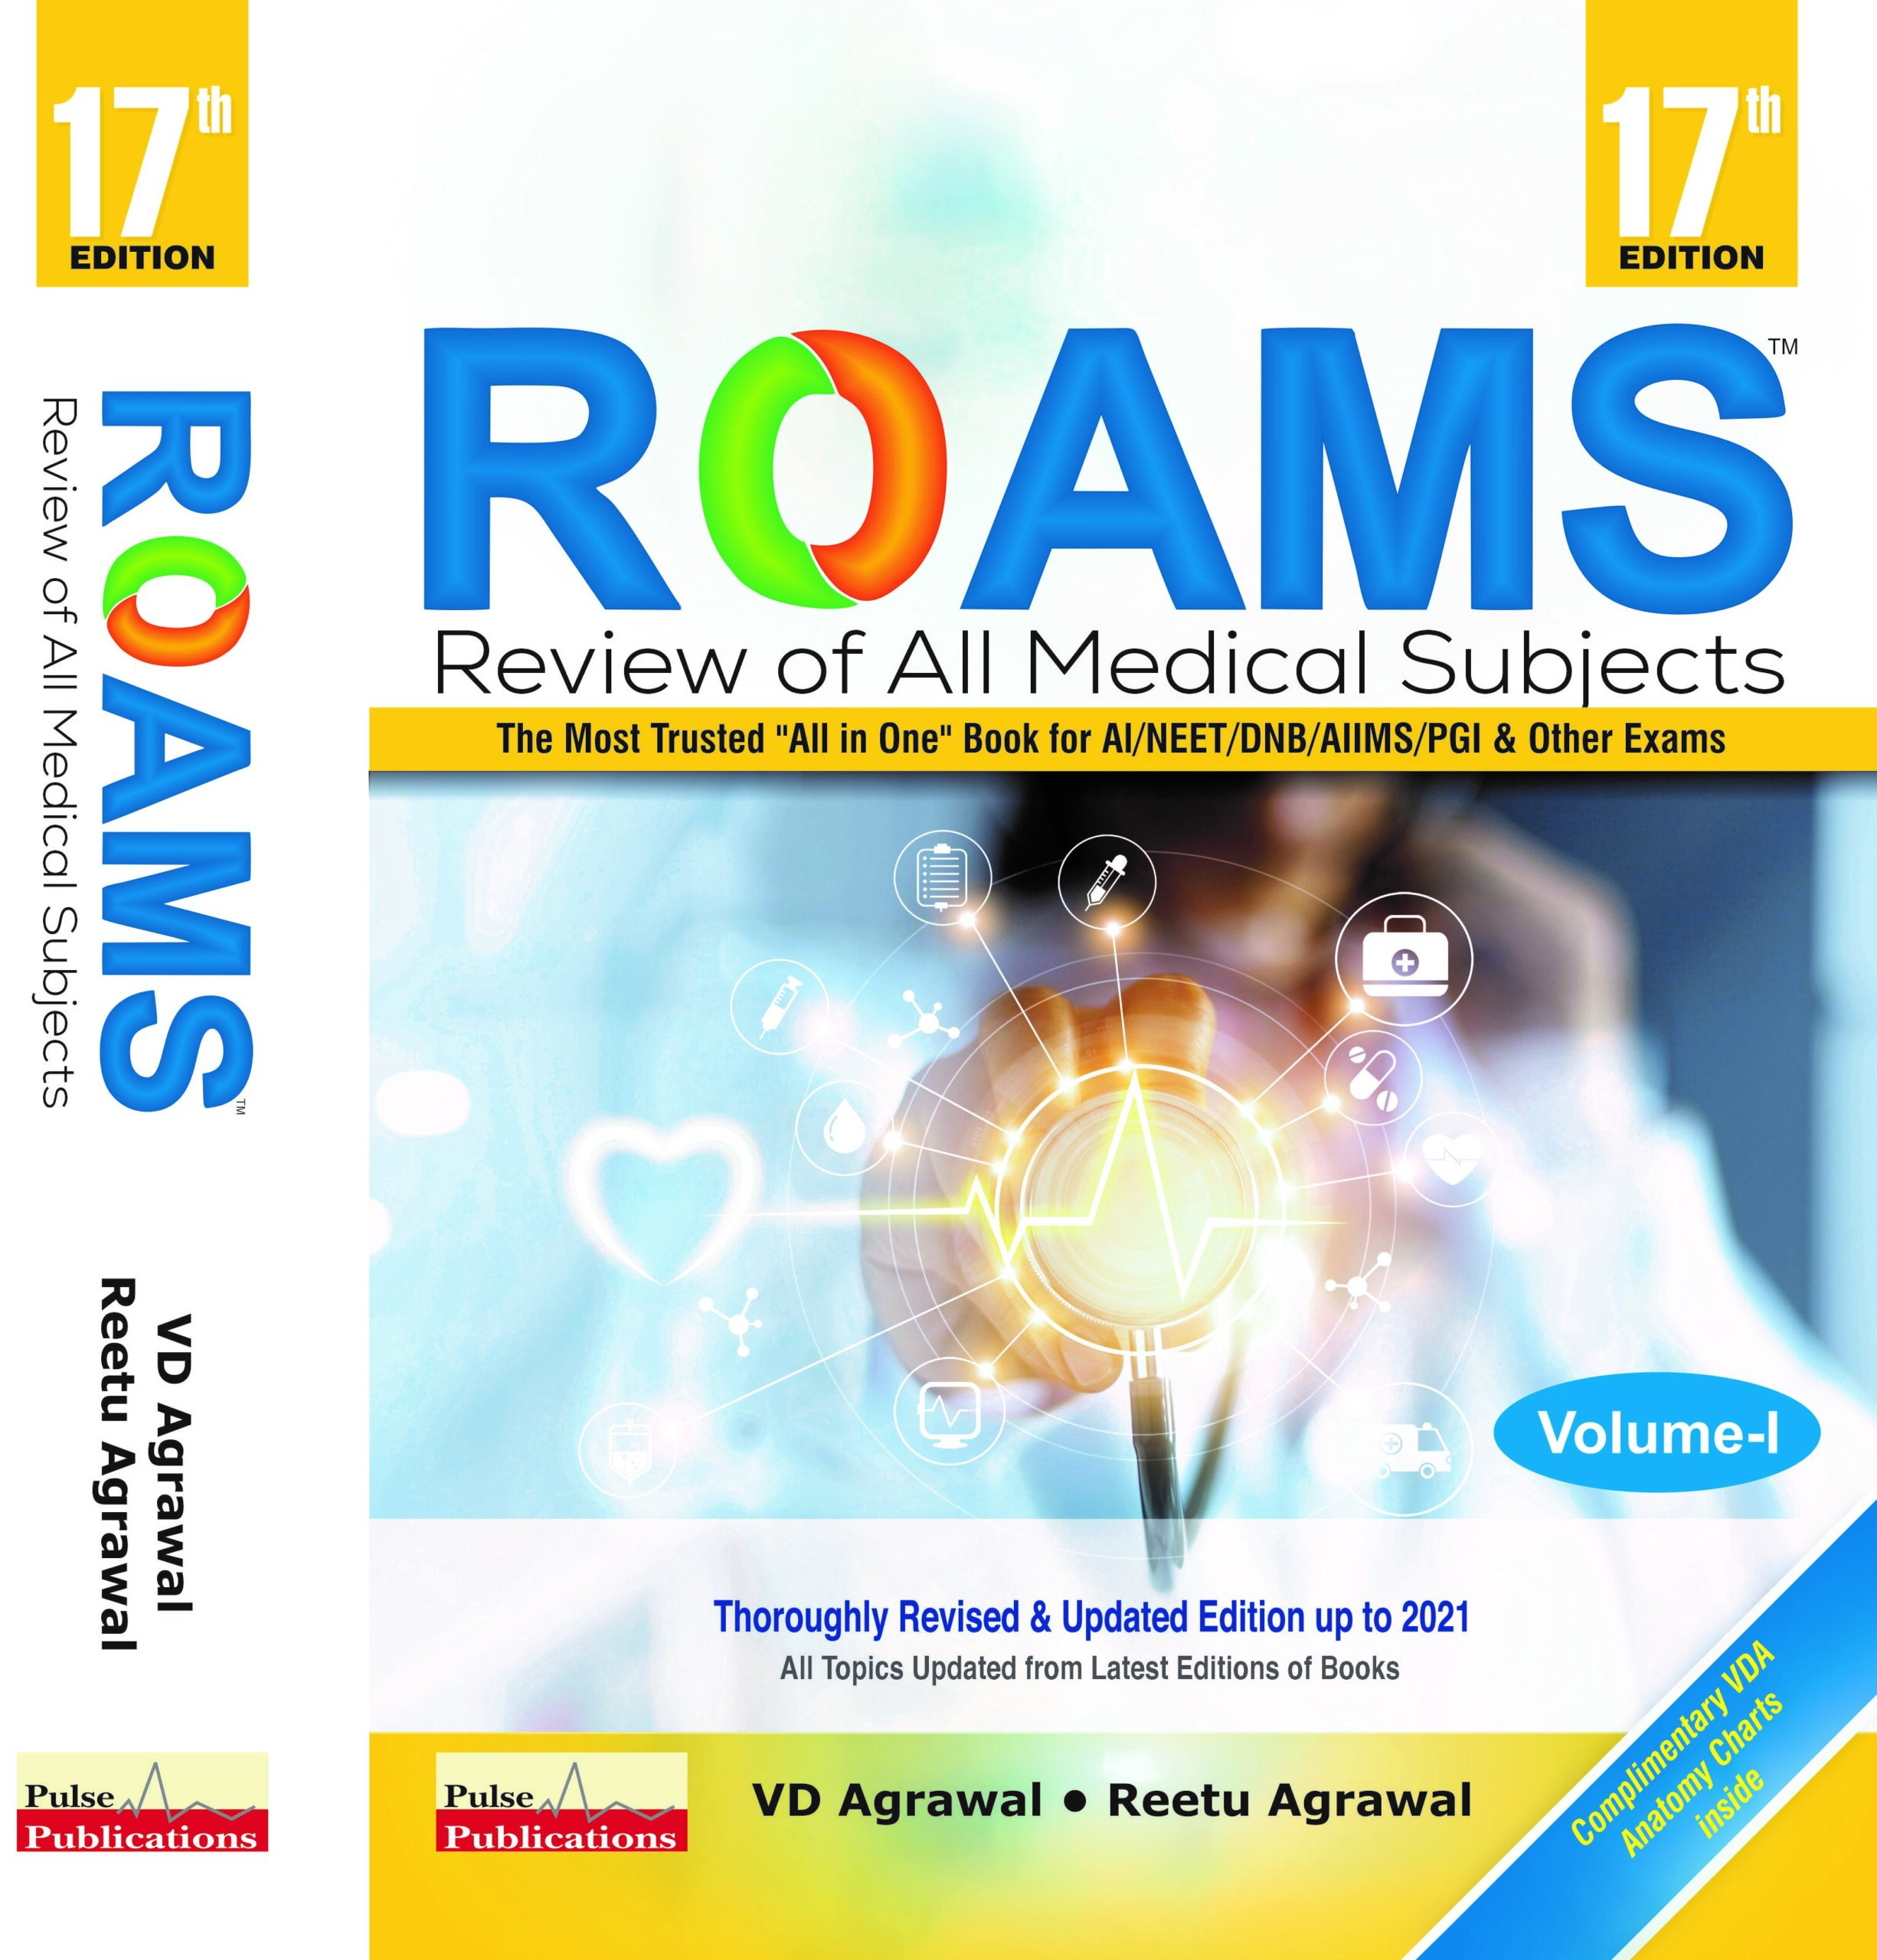 ROAMS REVIEW OF ALL MEDICAL SUBJECTS 15TH EDITION, 2019 - Books Tantra